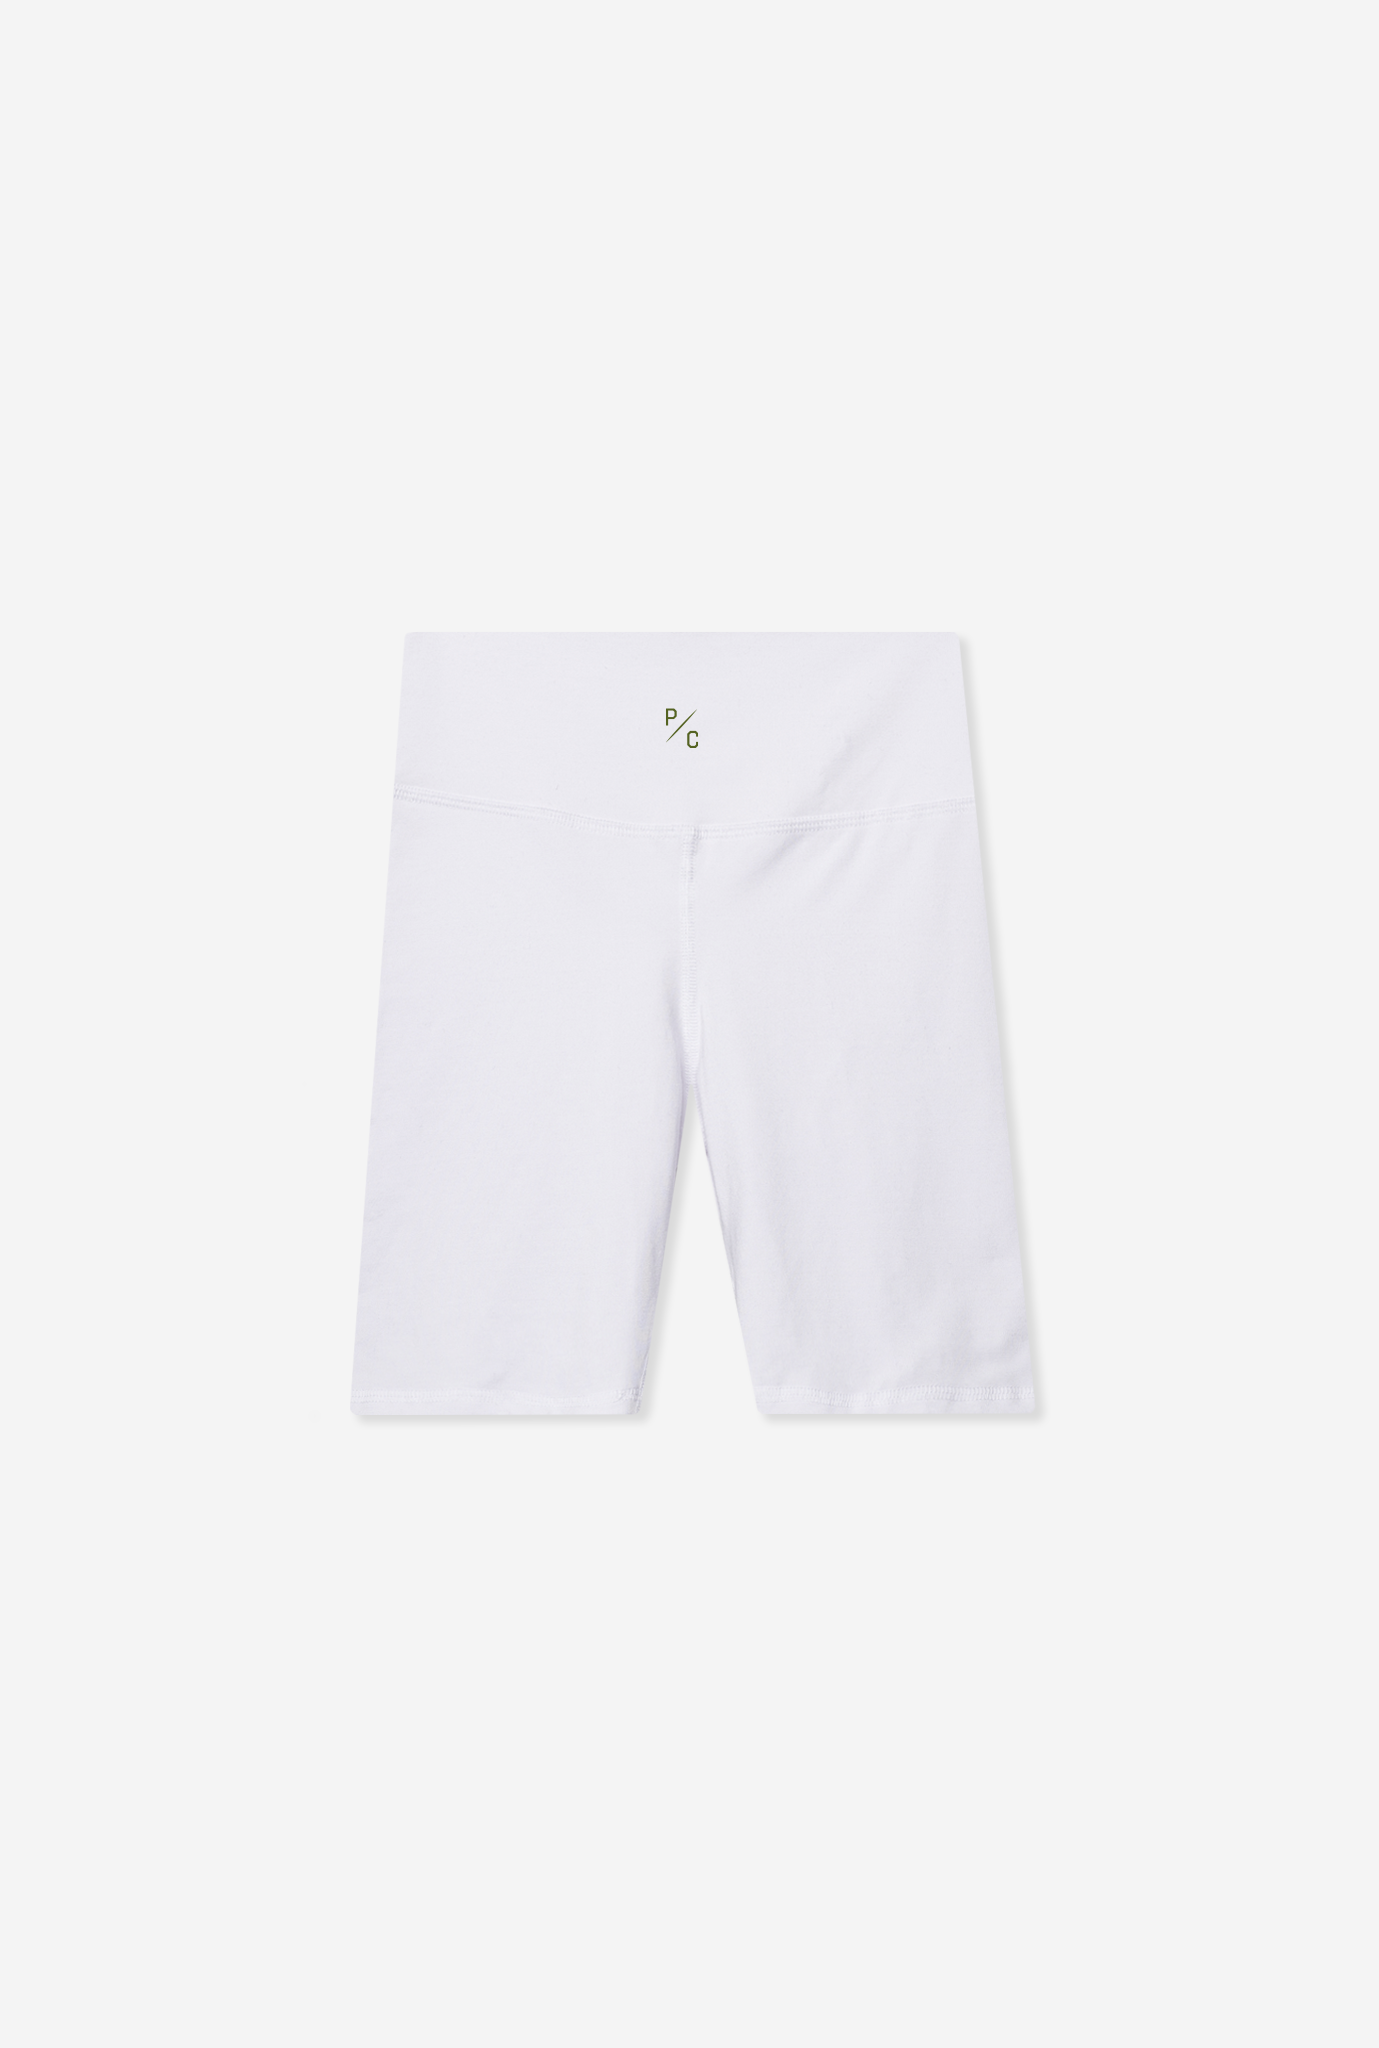 Protect Your Energy Movement™ Biker Shorts - White